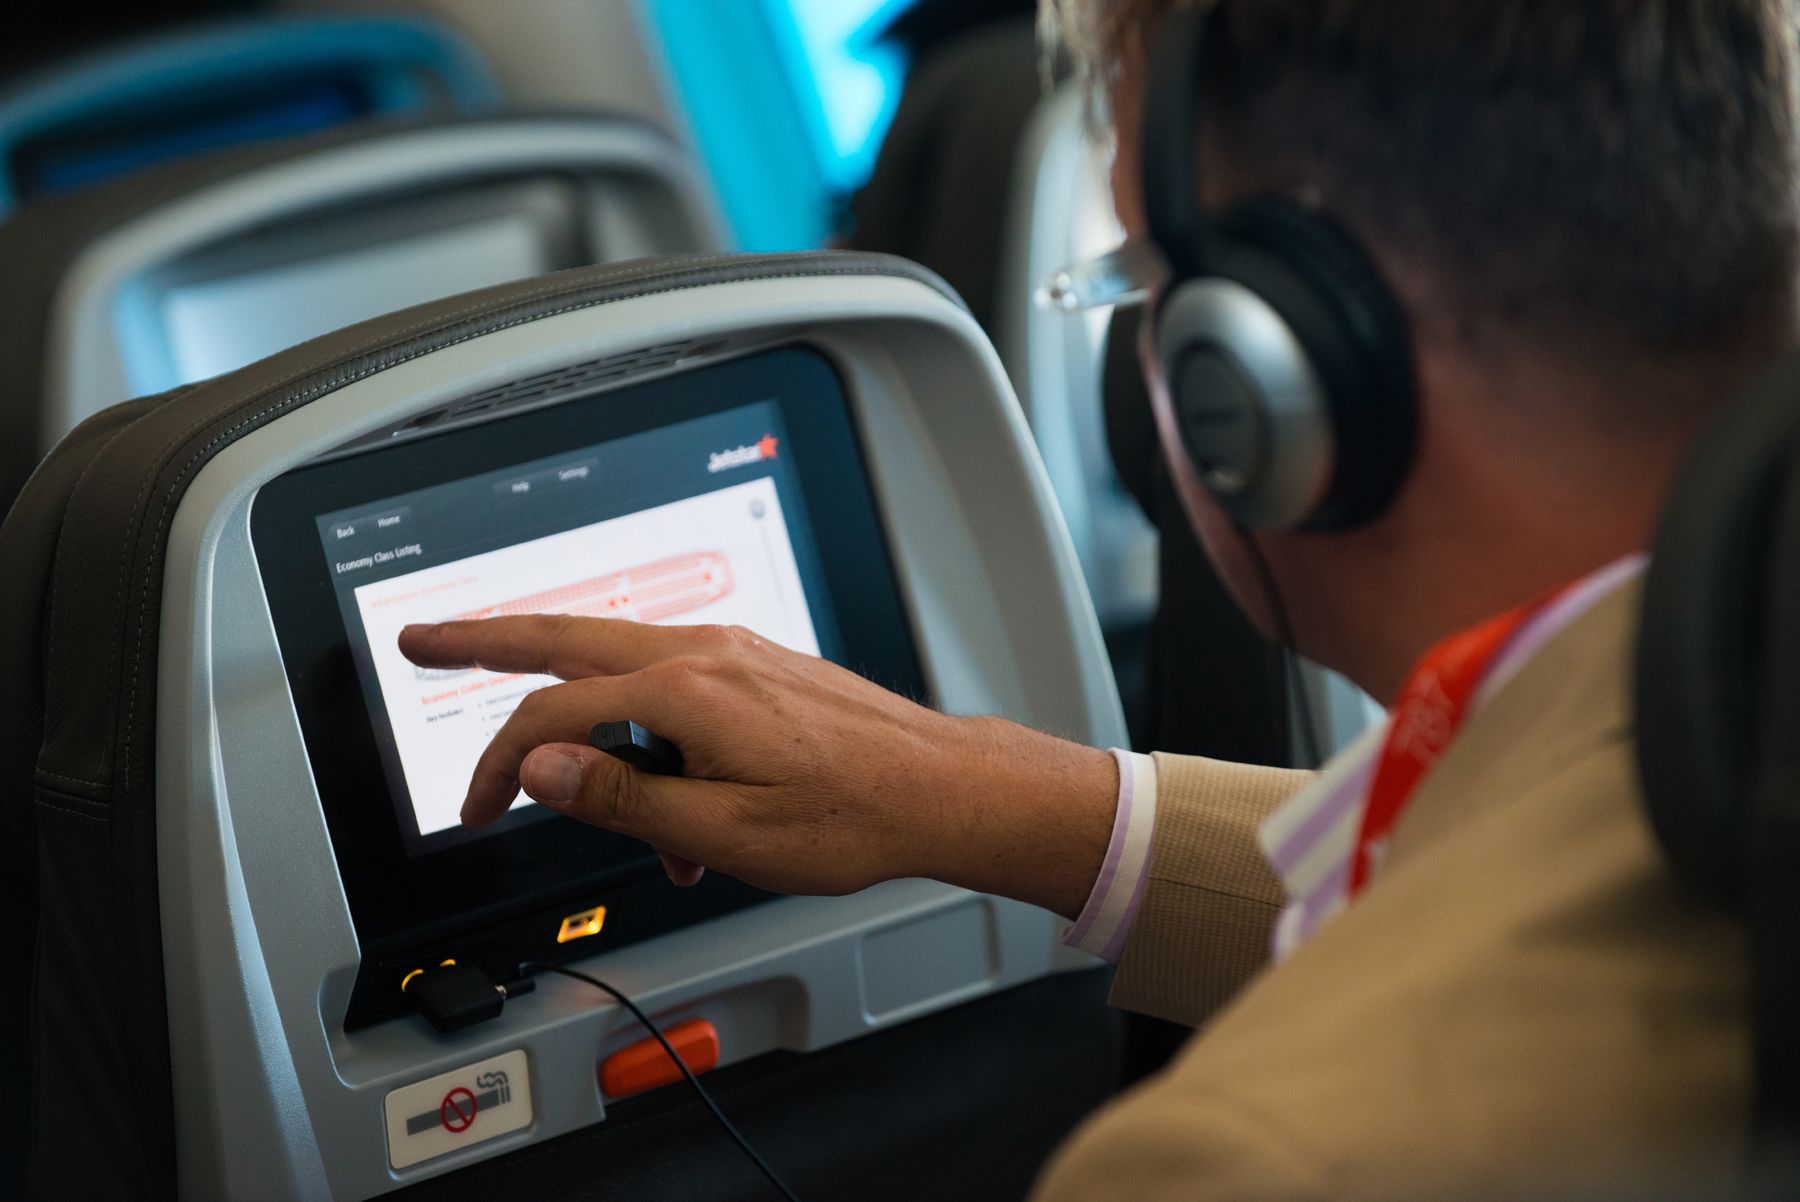 Man in a beige jacket using the touch screen in a seatback entertainment system wearing headphones